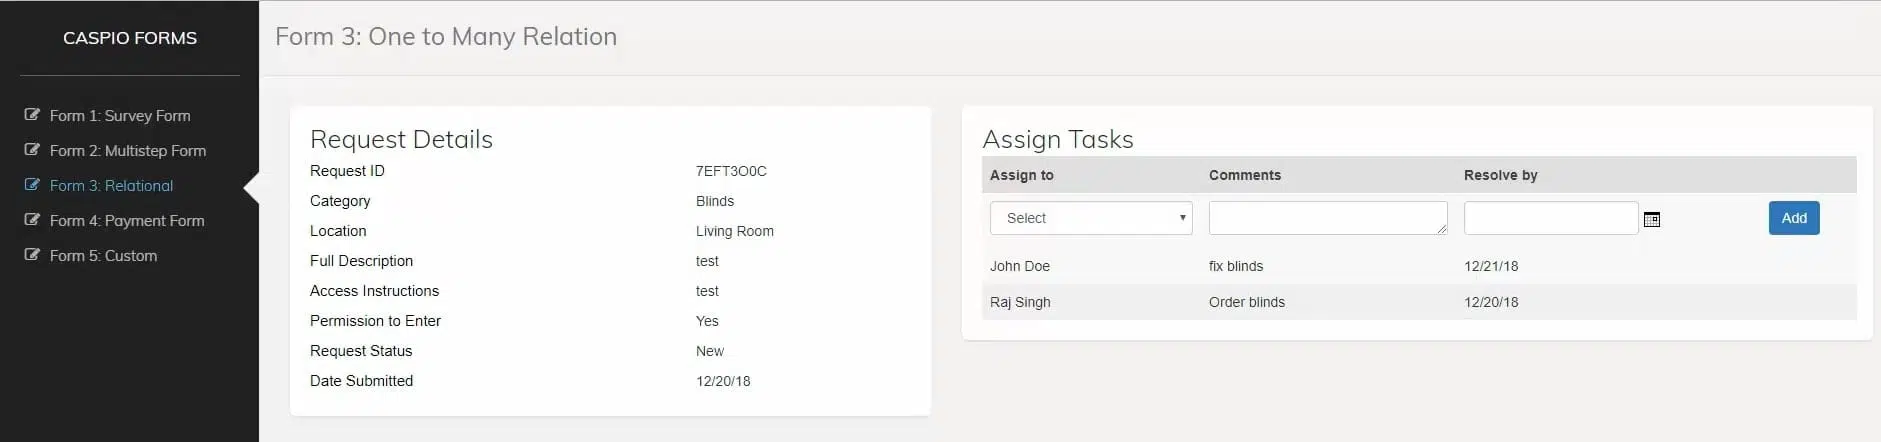 Screenshot of a sample page made on Caspio. It shows details of the users requests under “Request Details” and a menu to assign the request under “Assign Tasks”.